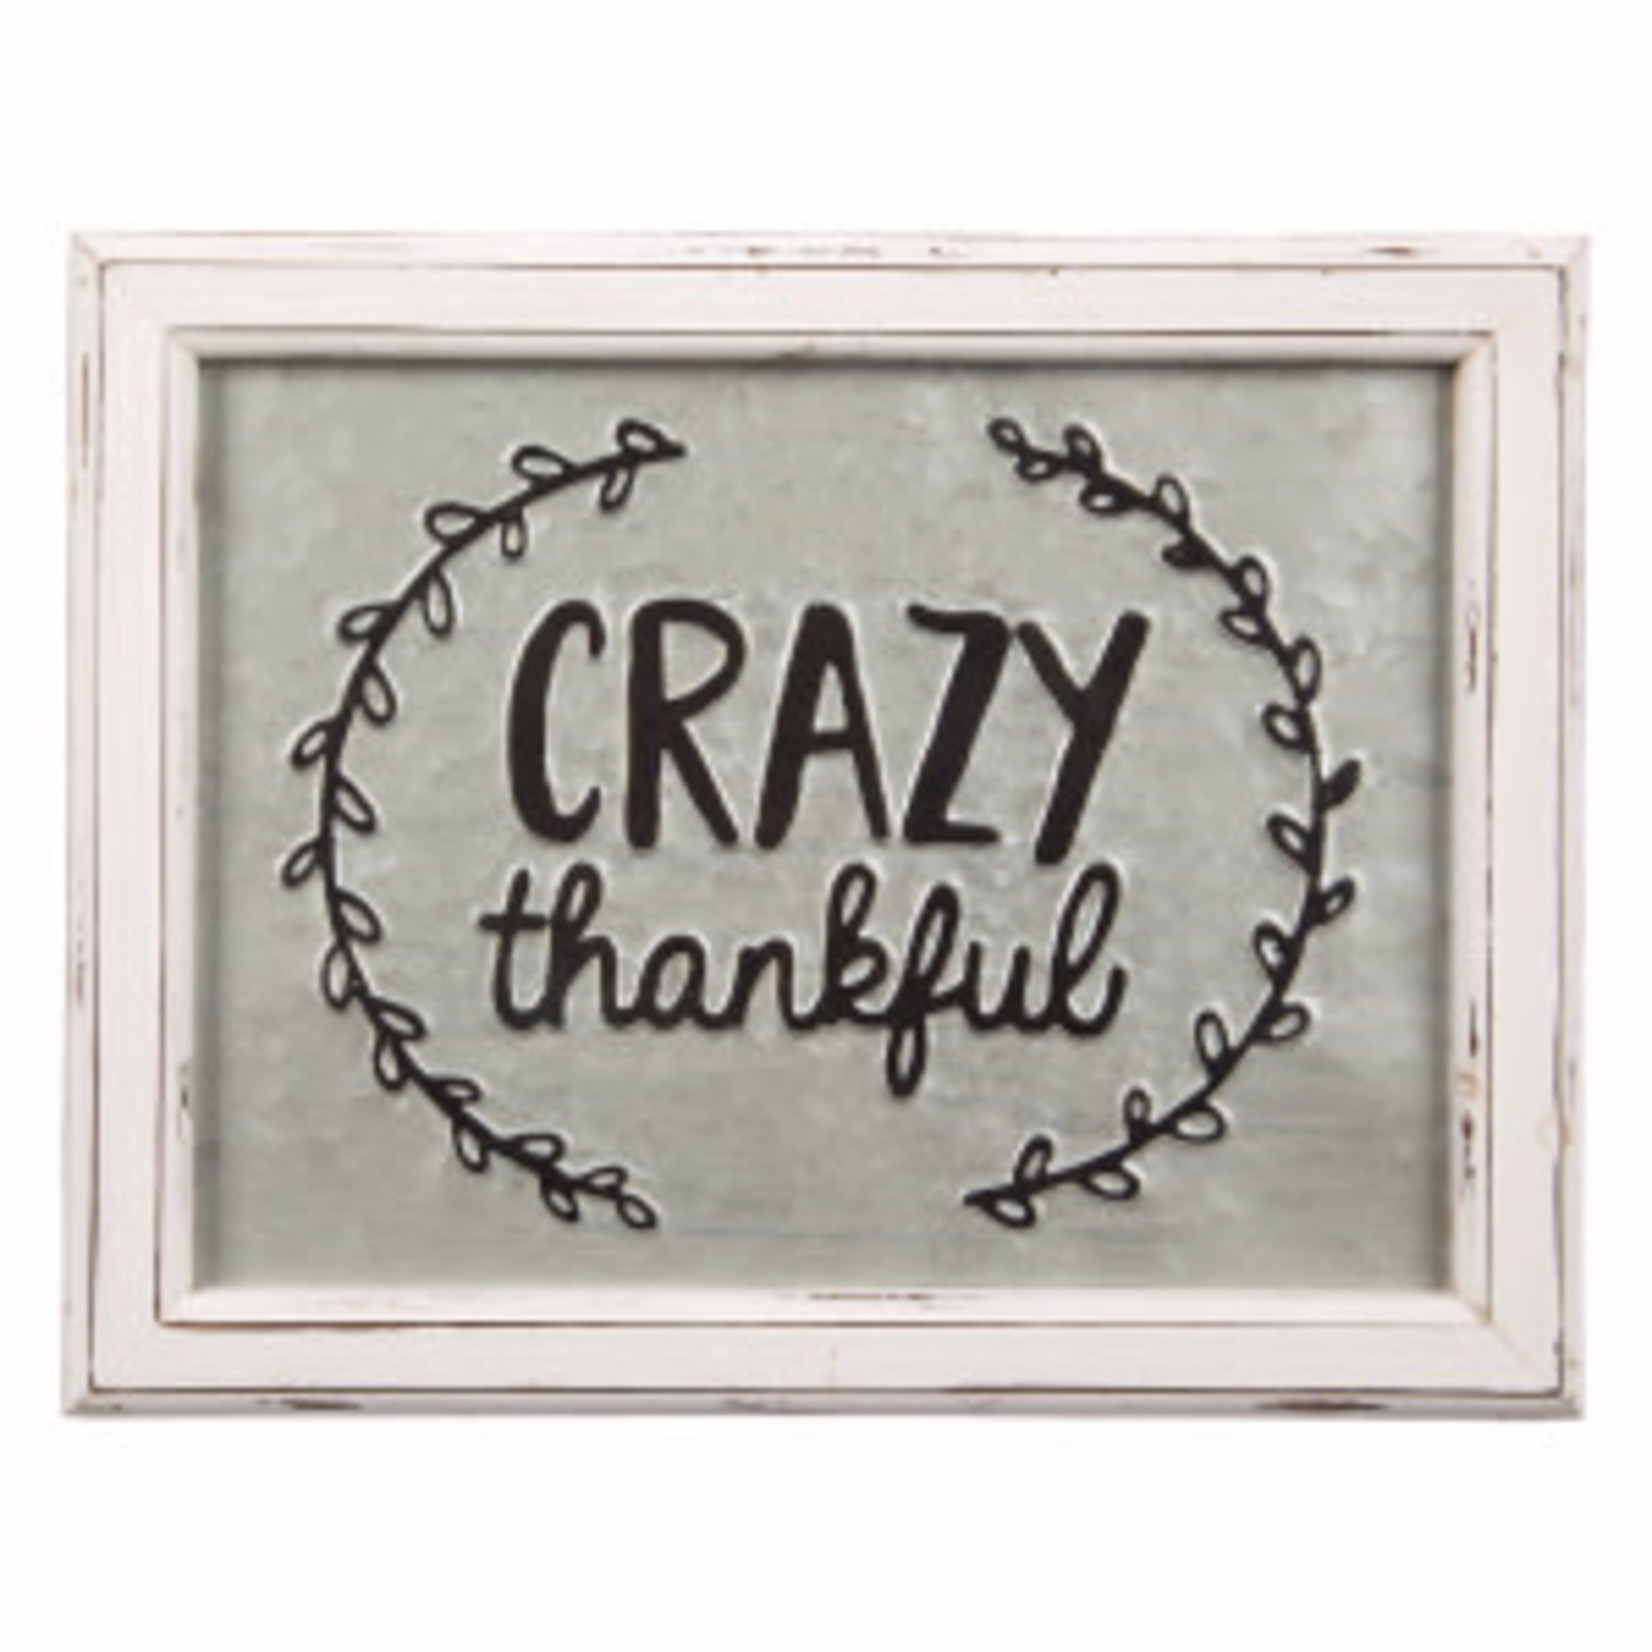 Crazy thankful embossed sign